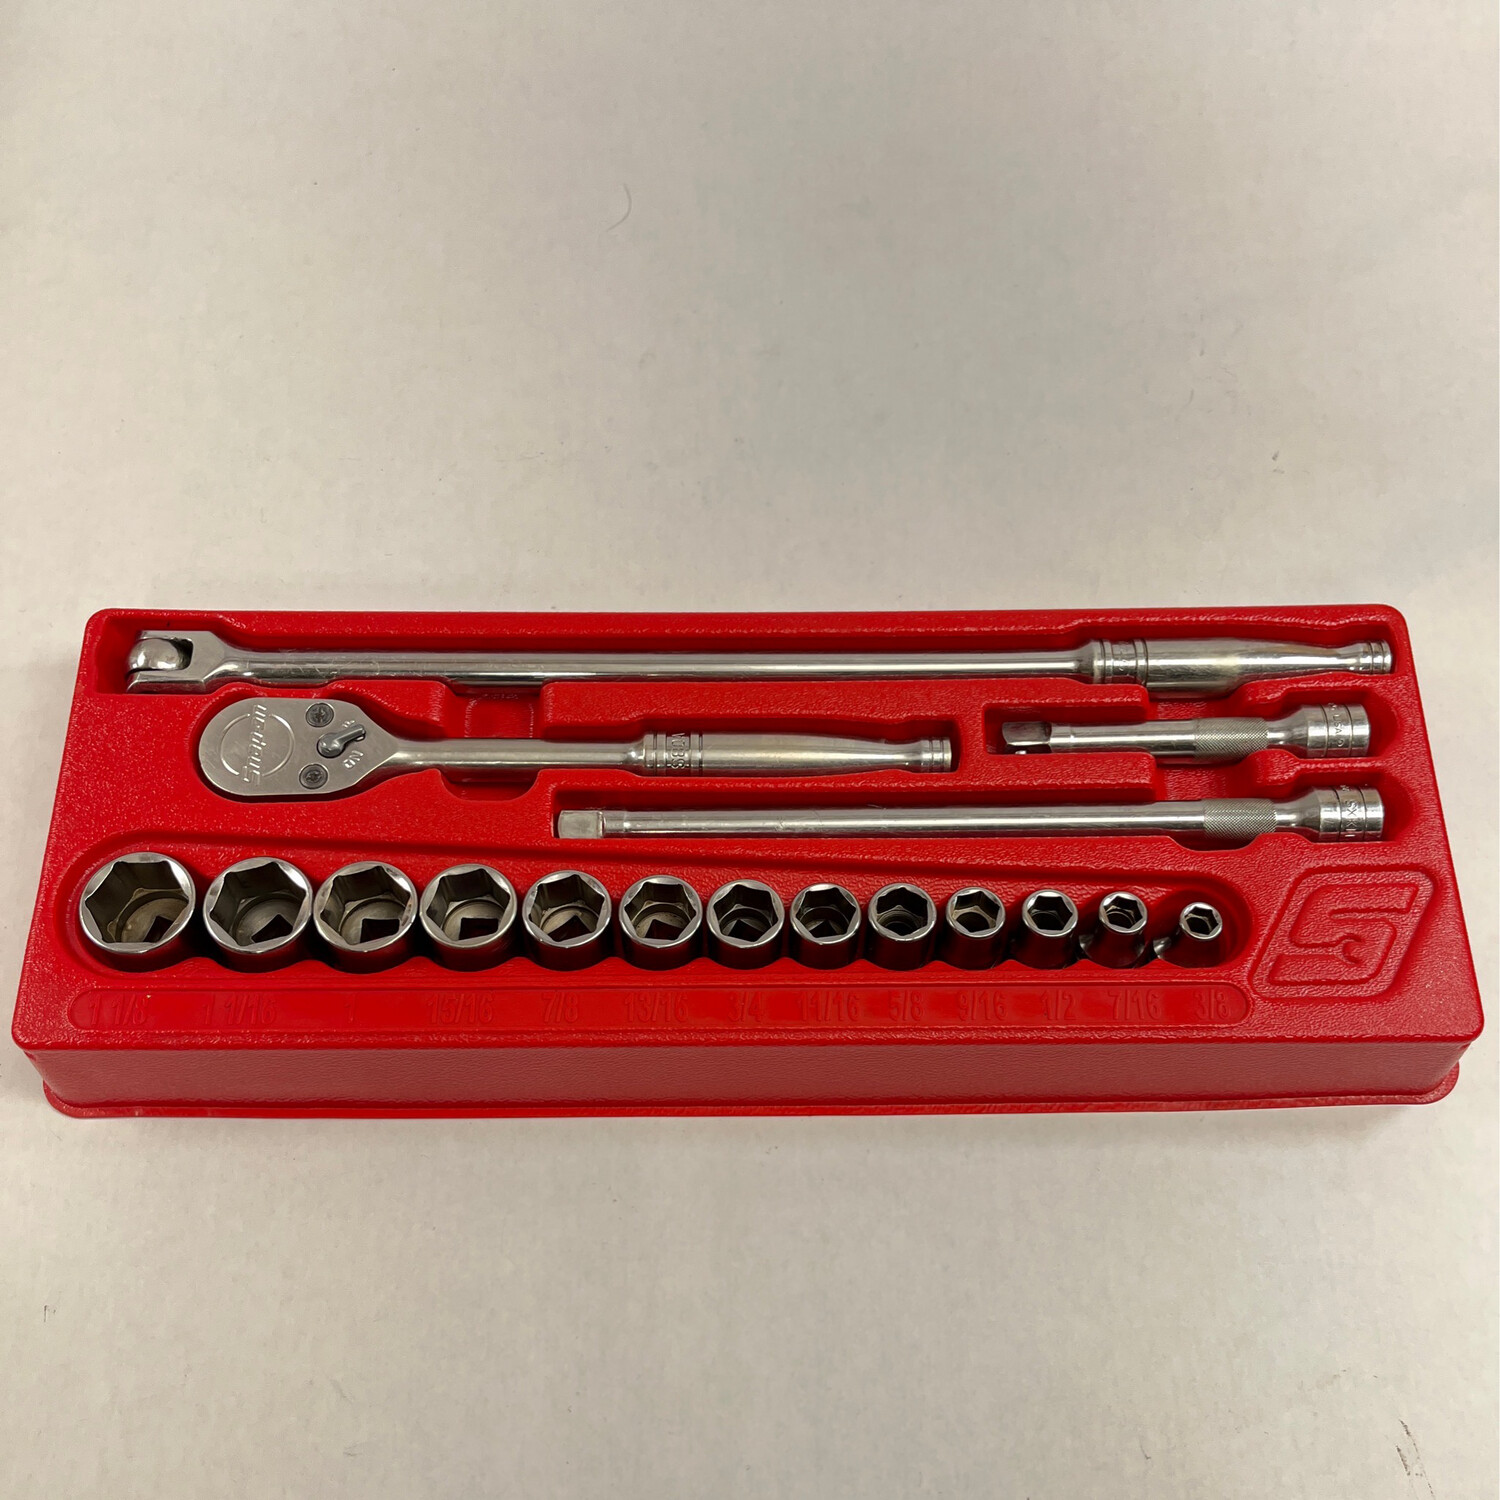 Snap On 17 Pc. 1/2" Drive 6-Point SAE General Service Socket Set (3/8”—1-1/8”)  317MSPC